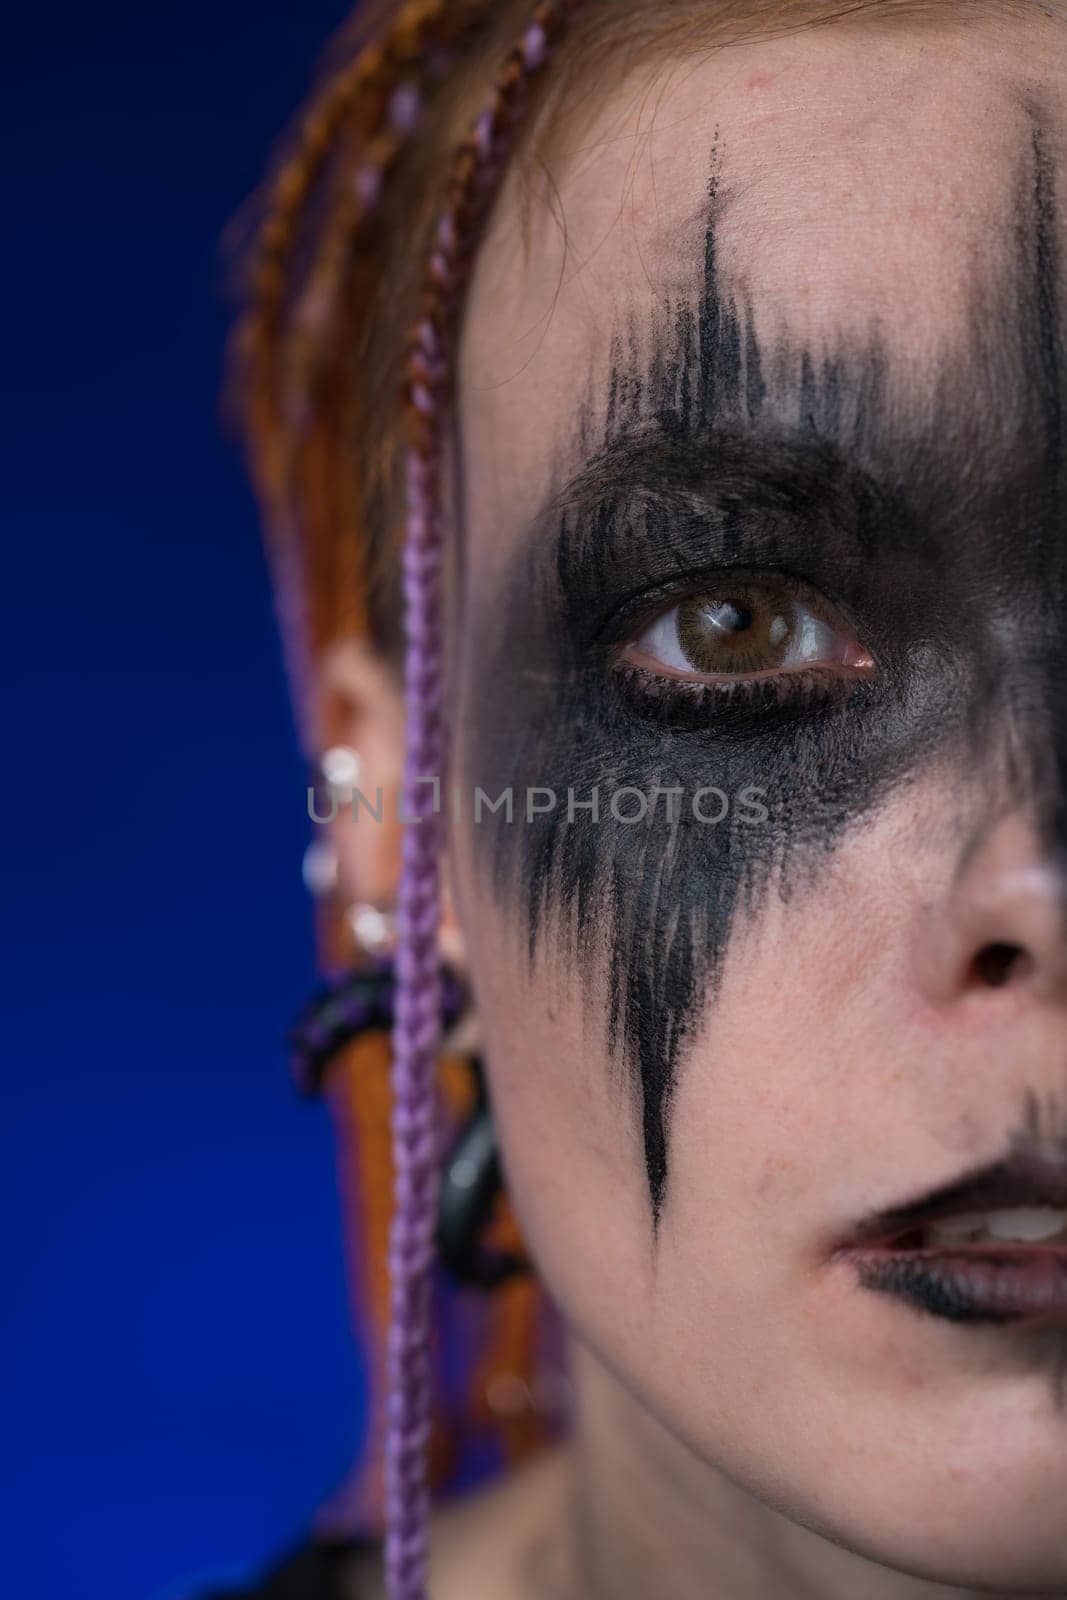 Dramatic portrait of half young female face with horror black stage makeup and dreadlocks hairstyle. Front view, studio shot on blue background. Part of photo series